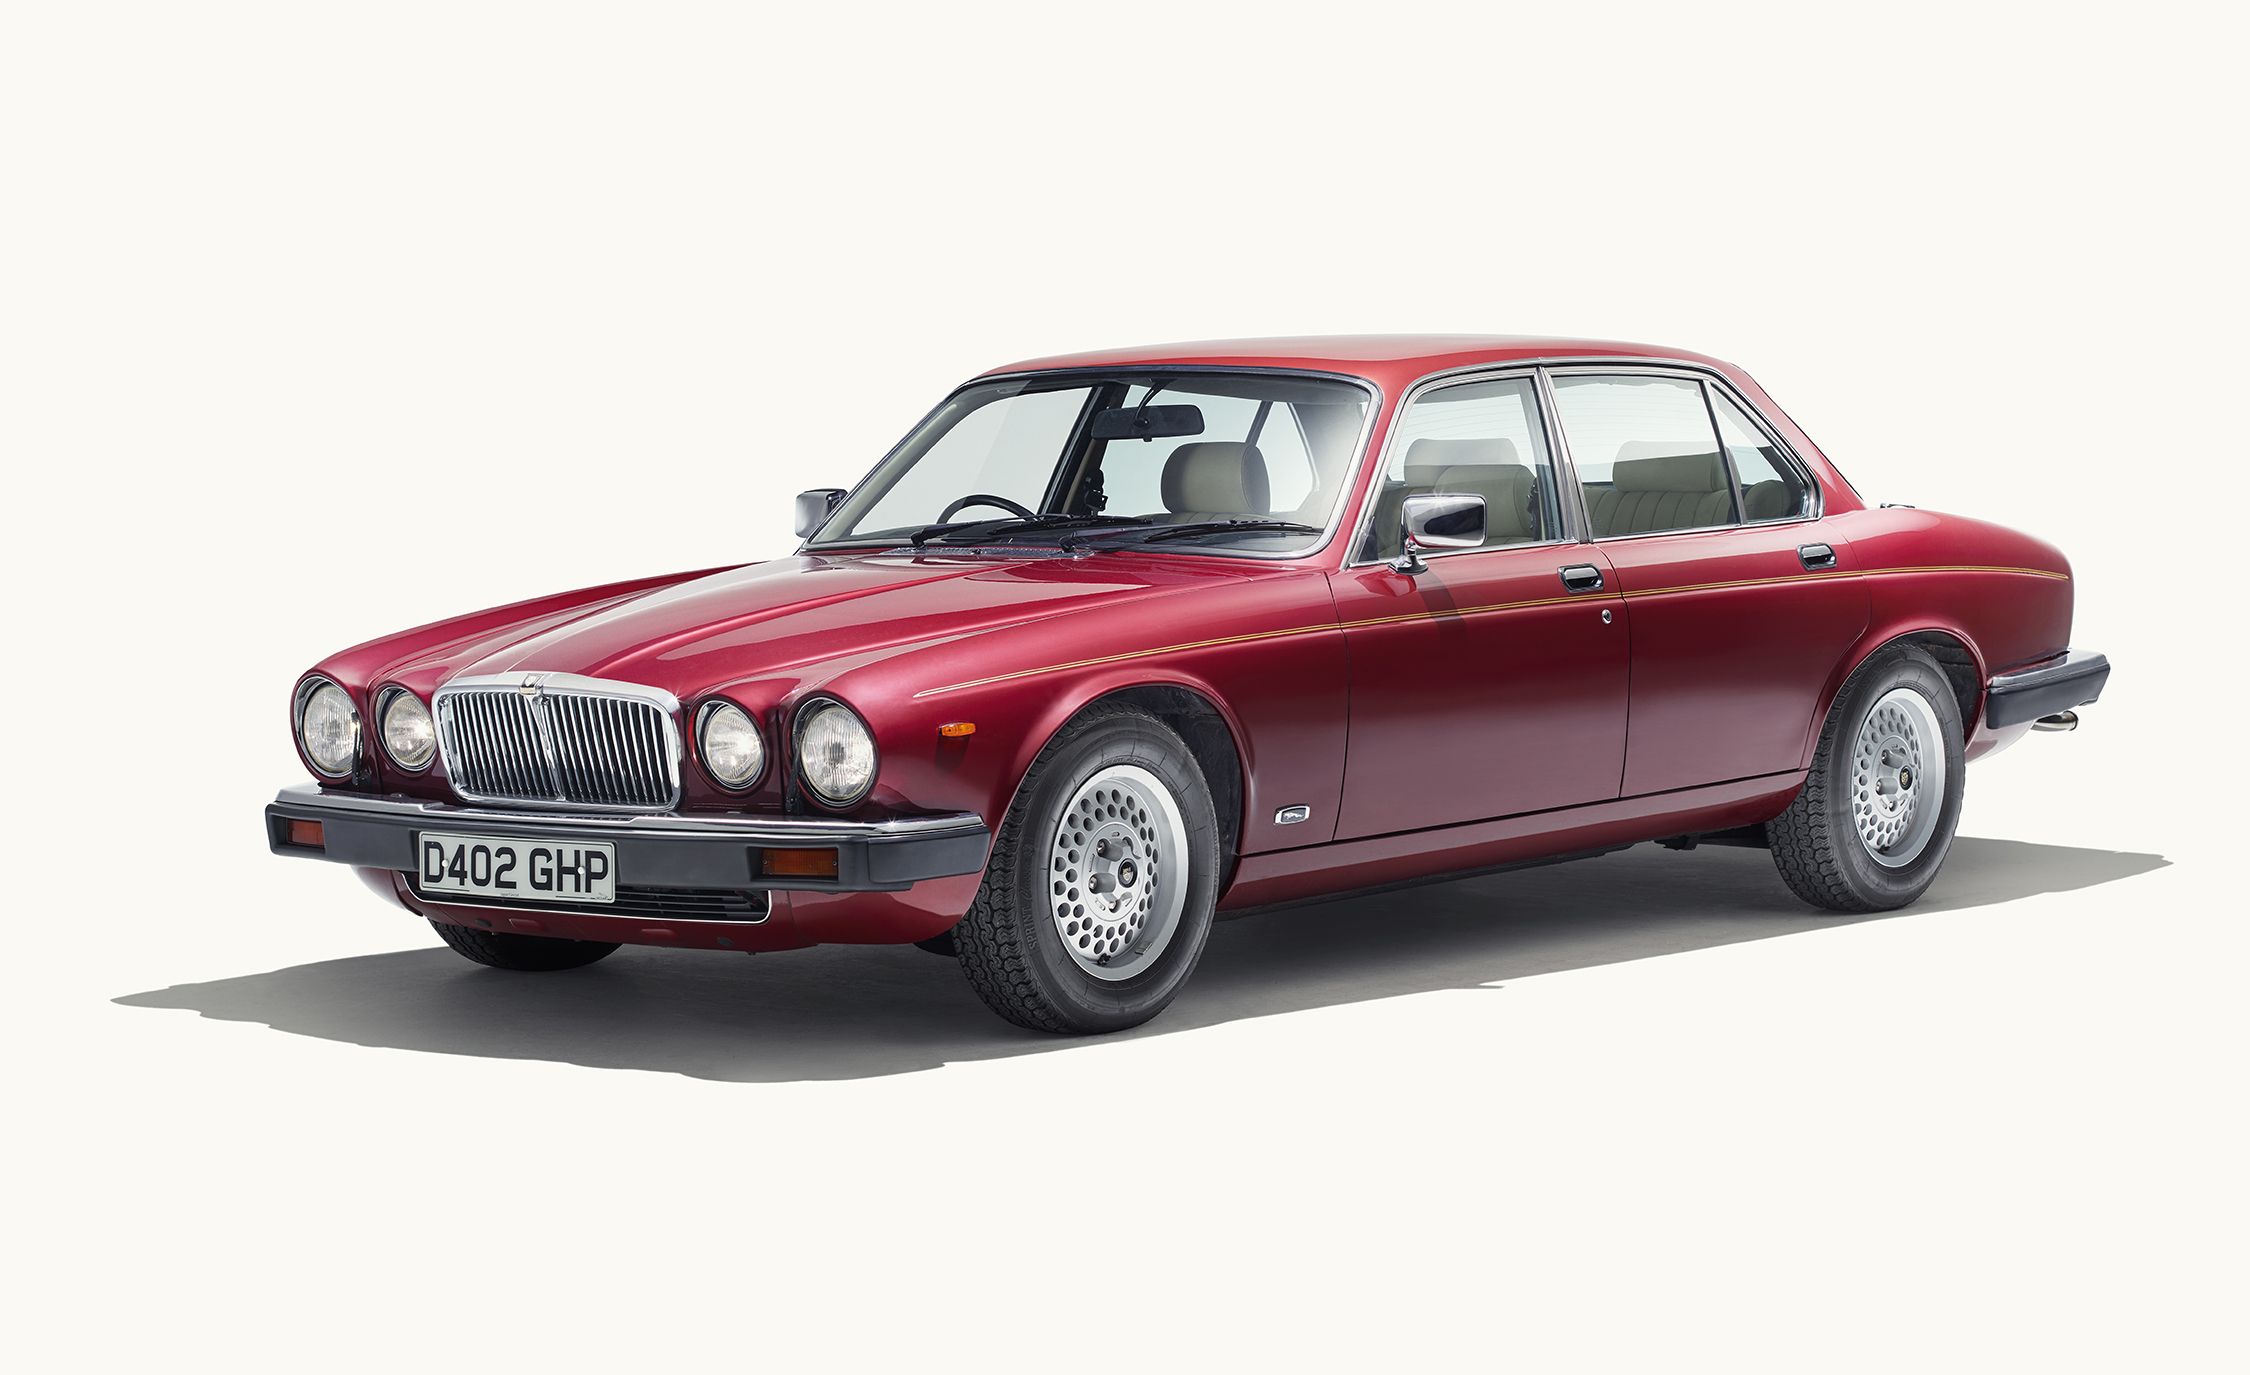 A Visual History of the Jaguar XJ's 50 Years of Elegance